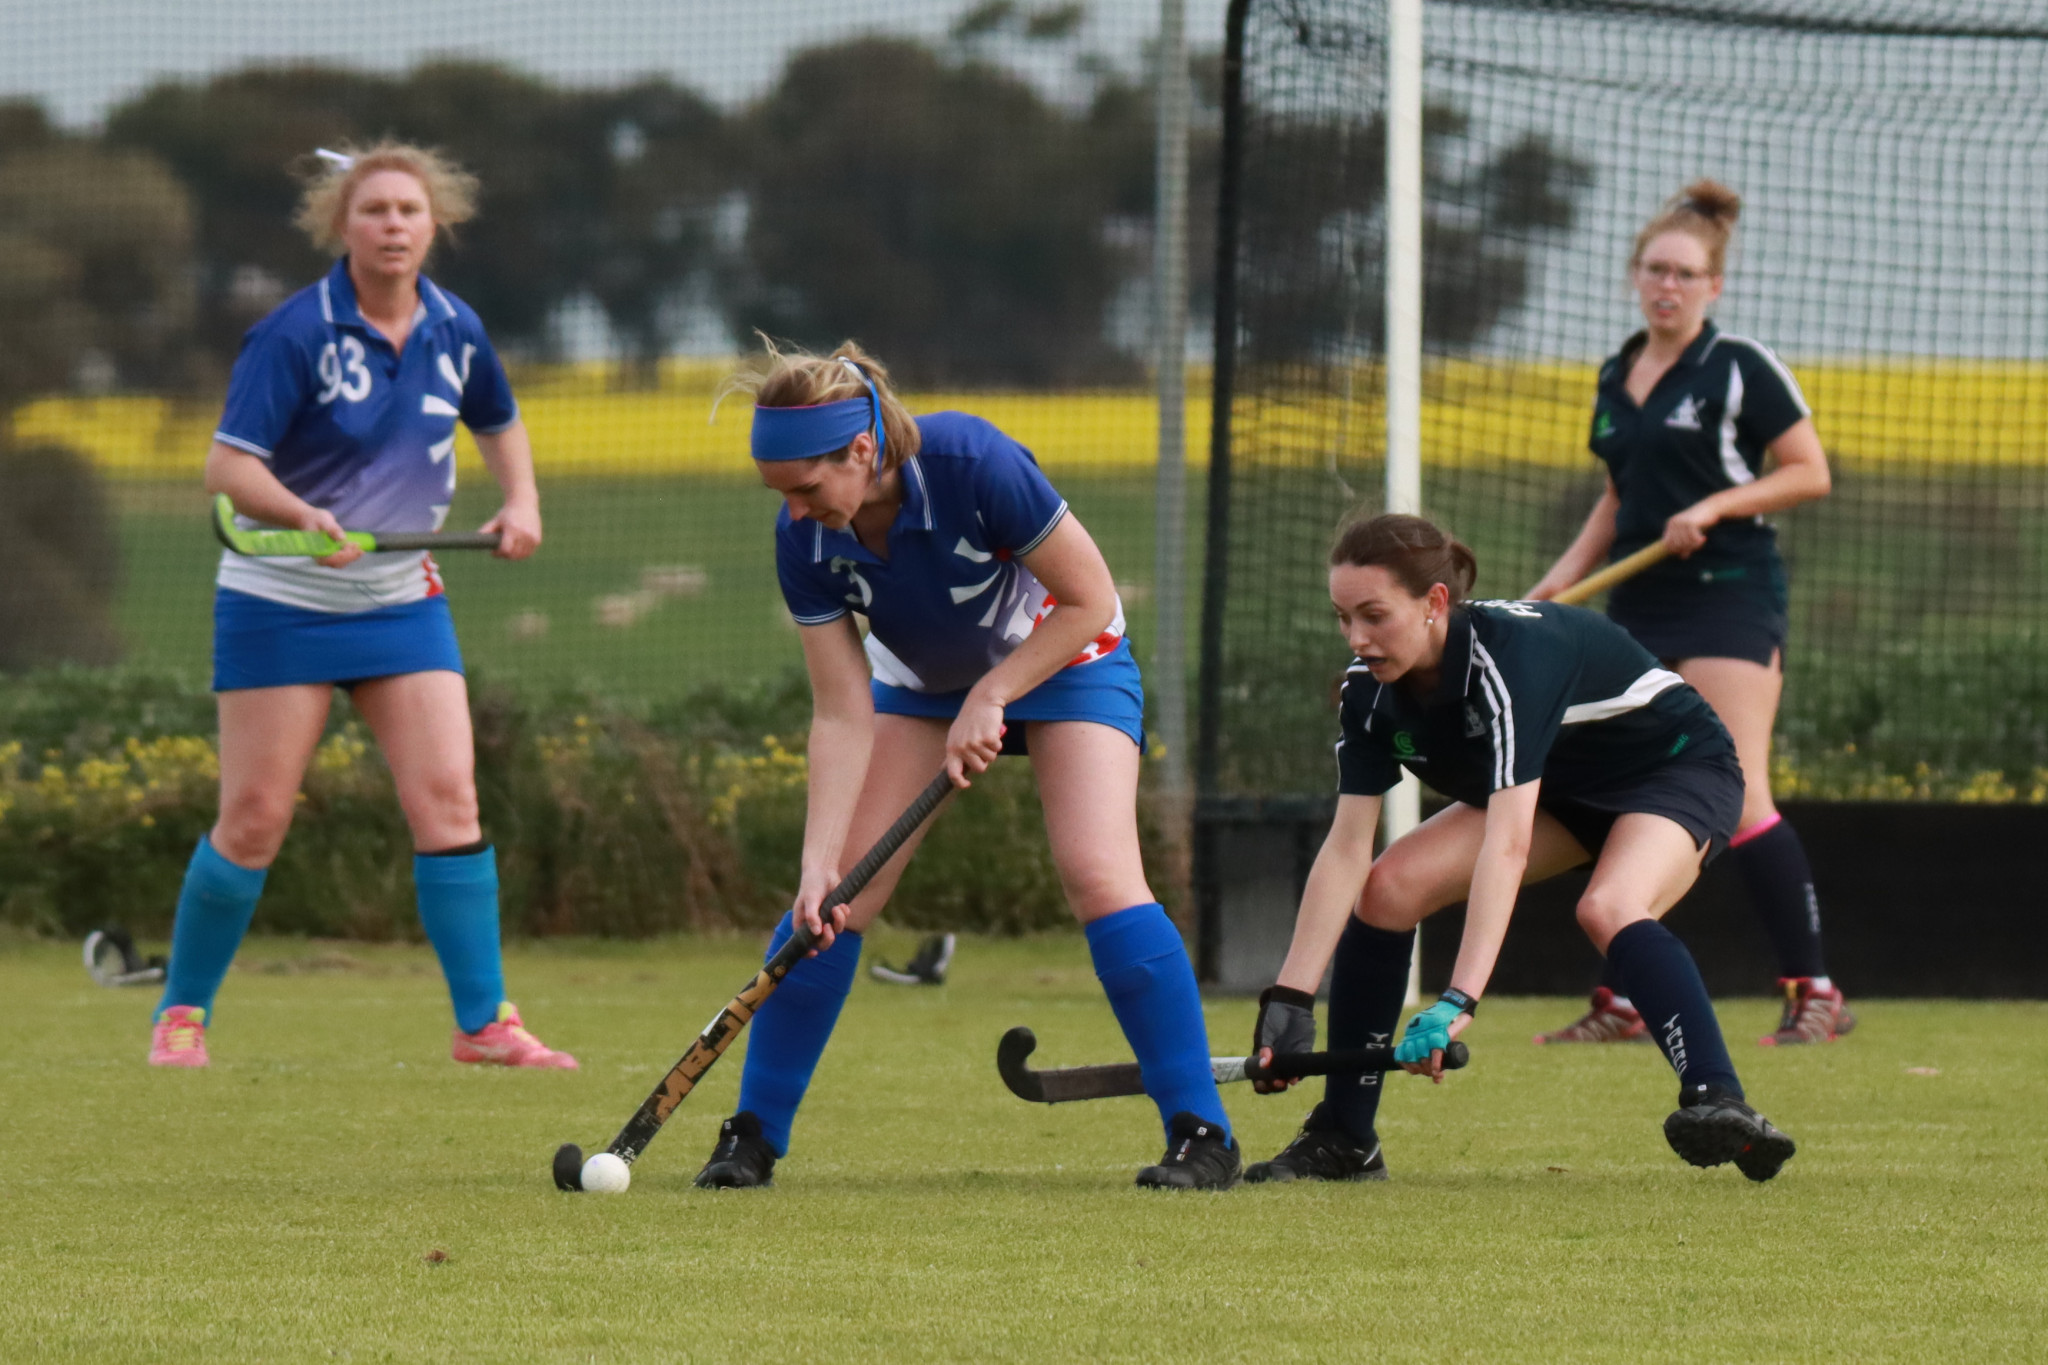 In last year’s Women’s grand final, Hanna Braisby controls the ball despite pressure from Mikayla Mackley, while Jules Braisby (rear left) and Tempany Croot look on.